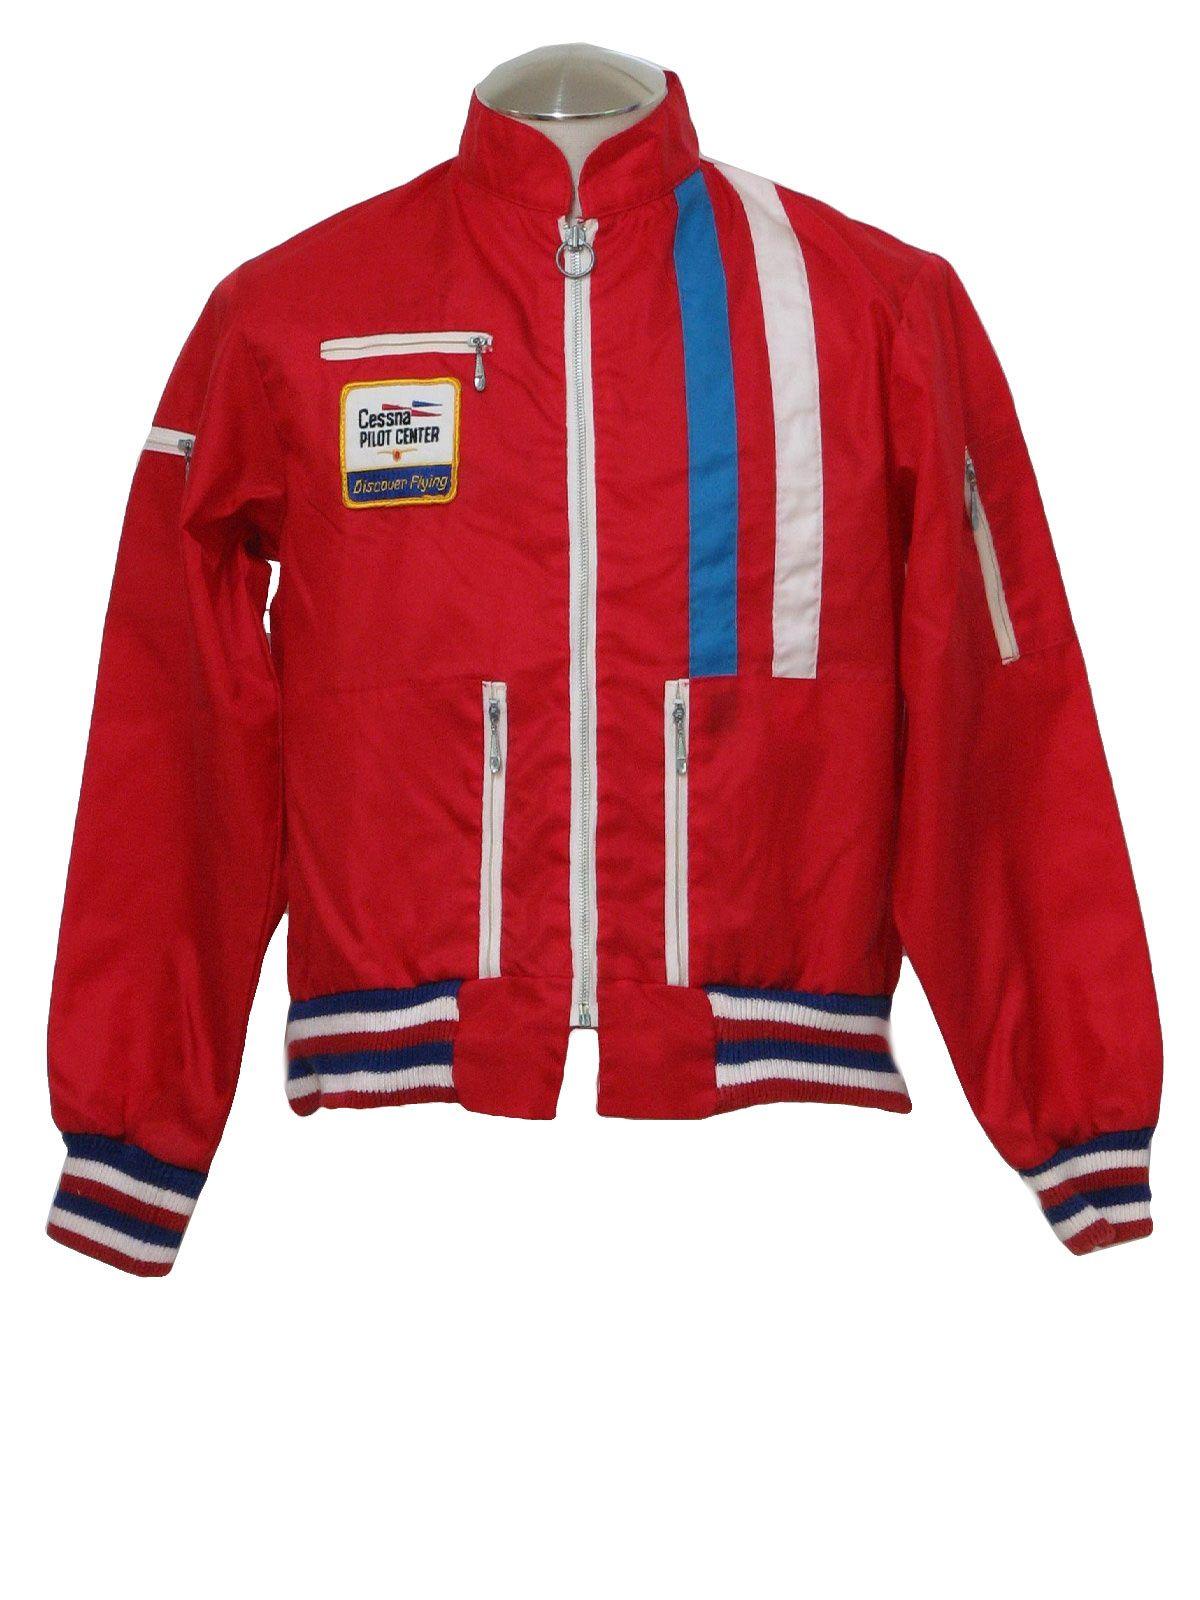 White with Red Center Logo - 70's Great Lakes Jacket Jacket: 70s -Great Lakes Jacket- Mens red